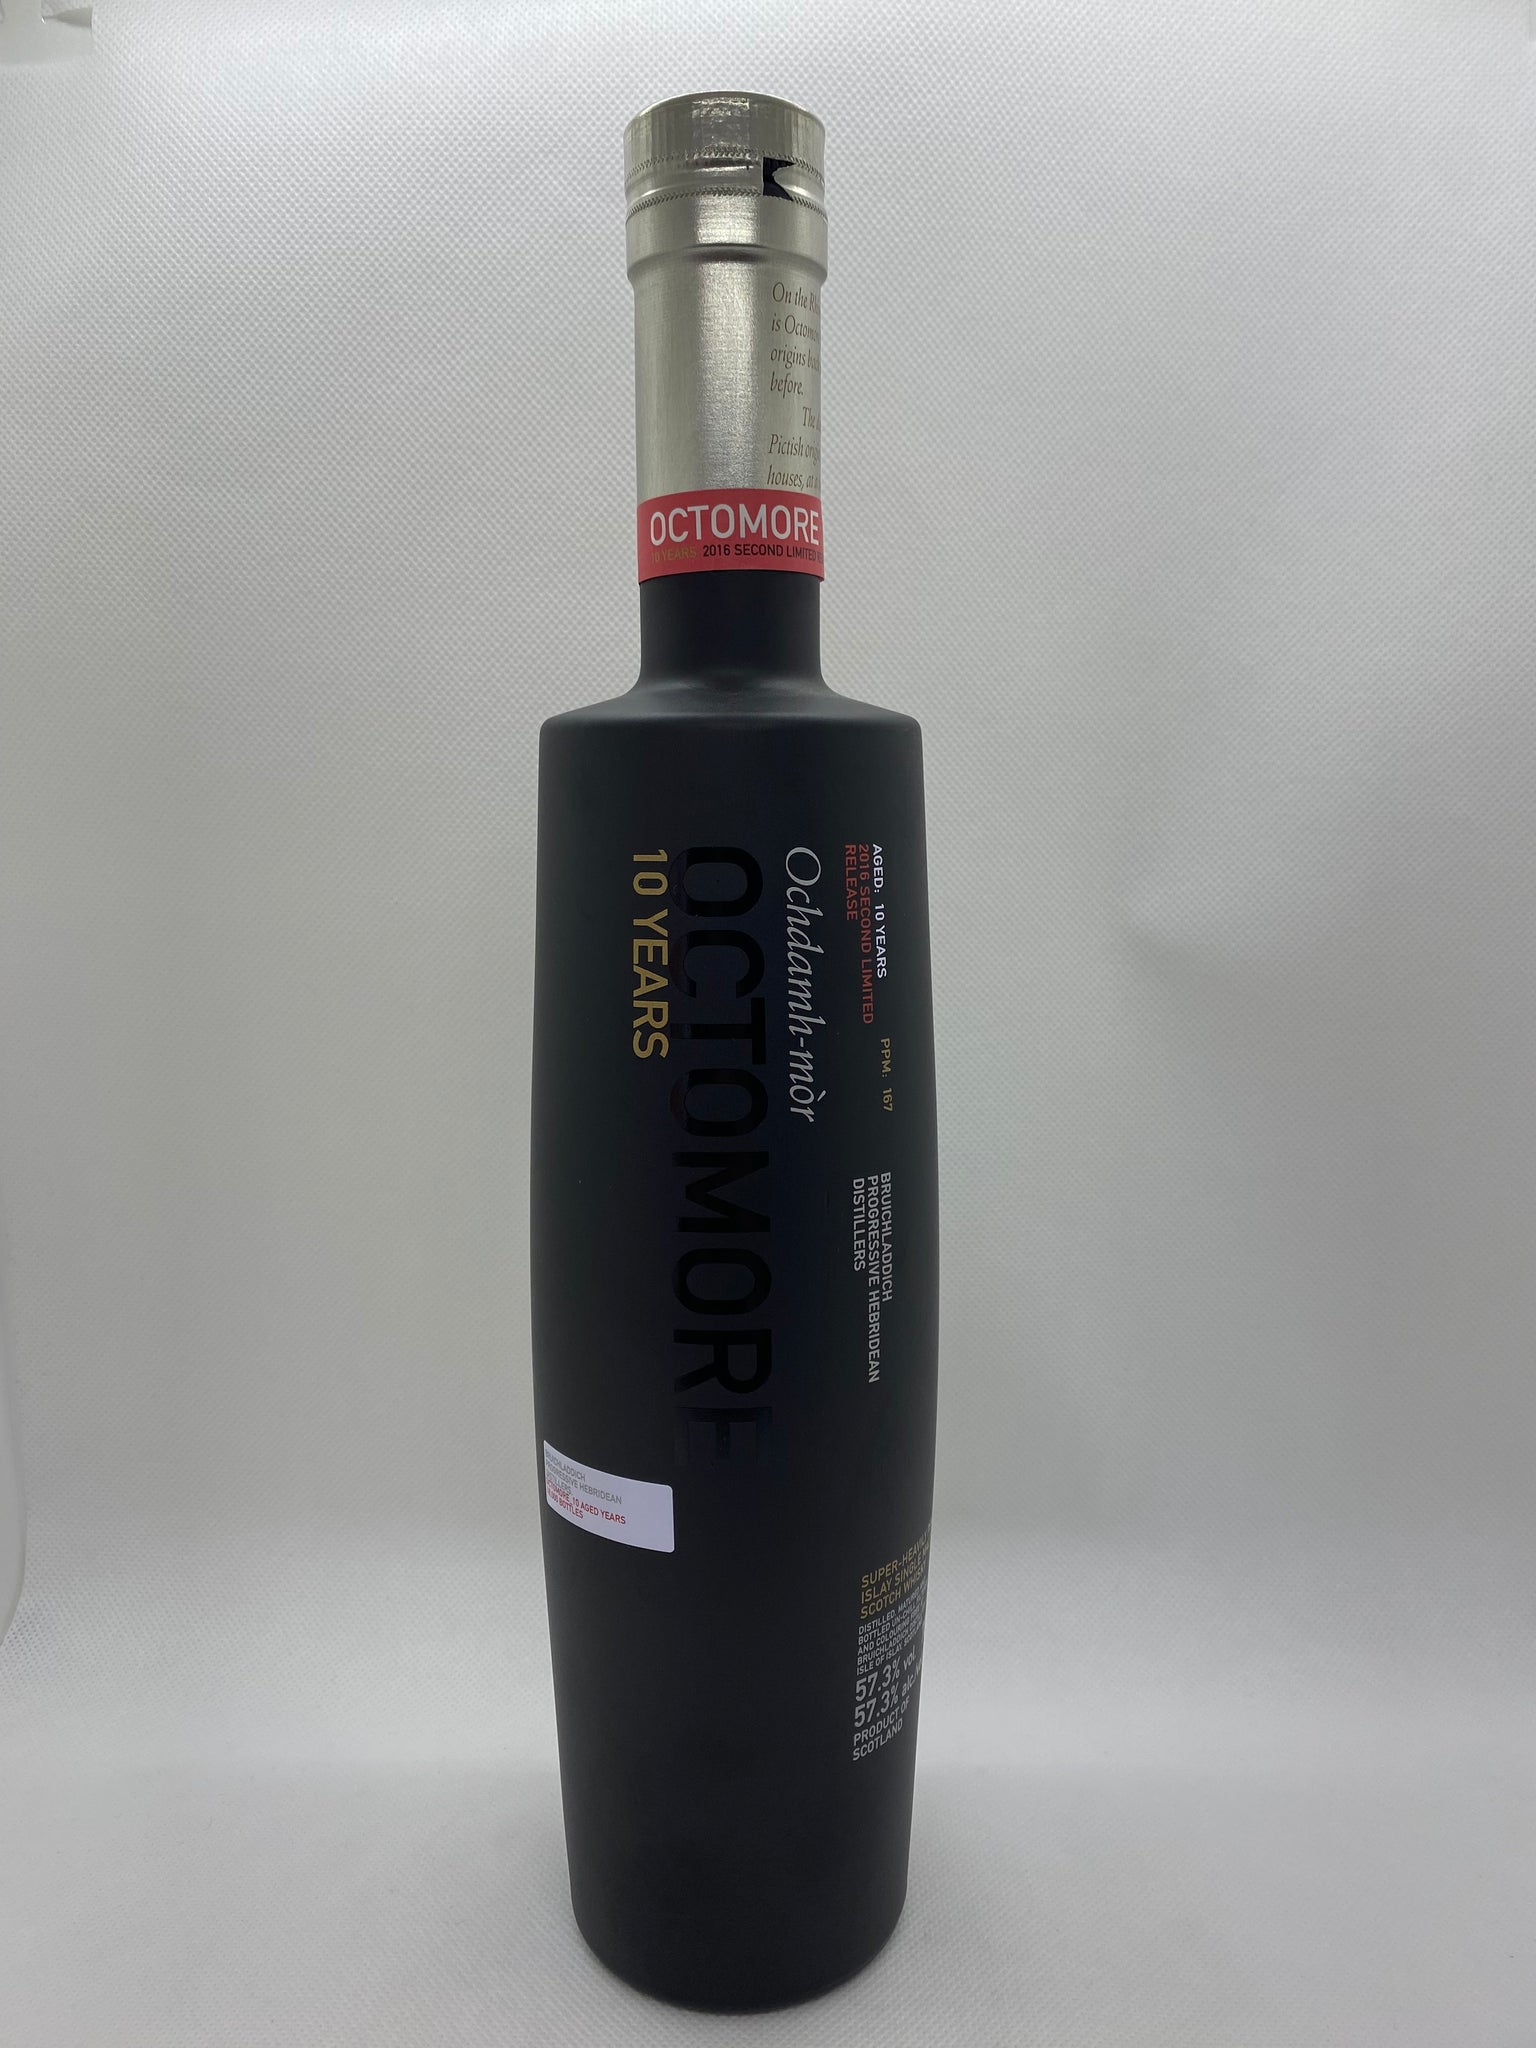 OCTOMORE 10 ANS 2ND EDITION 57.3 %   167 ppm